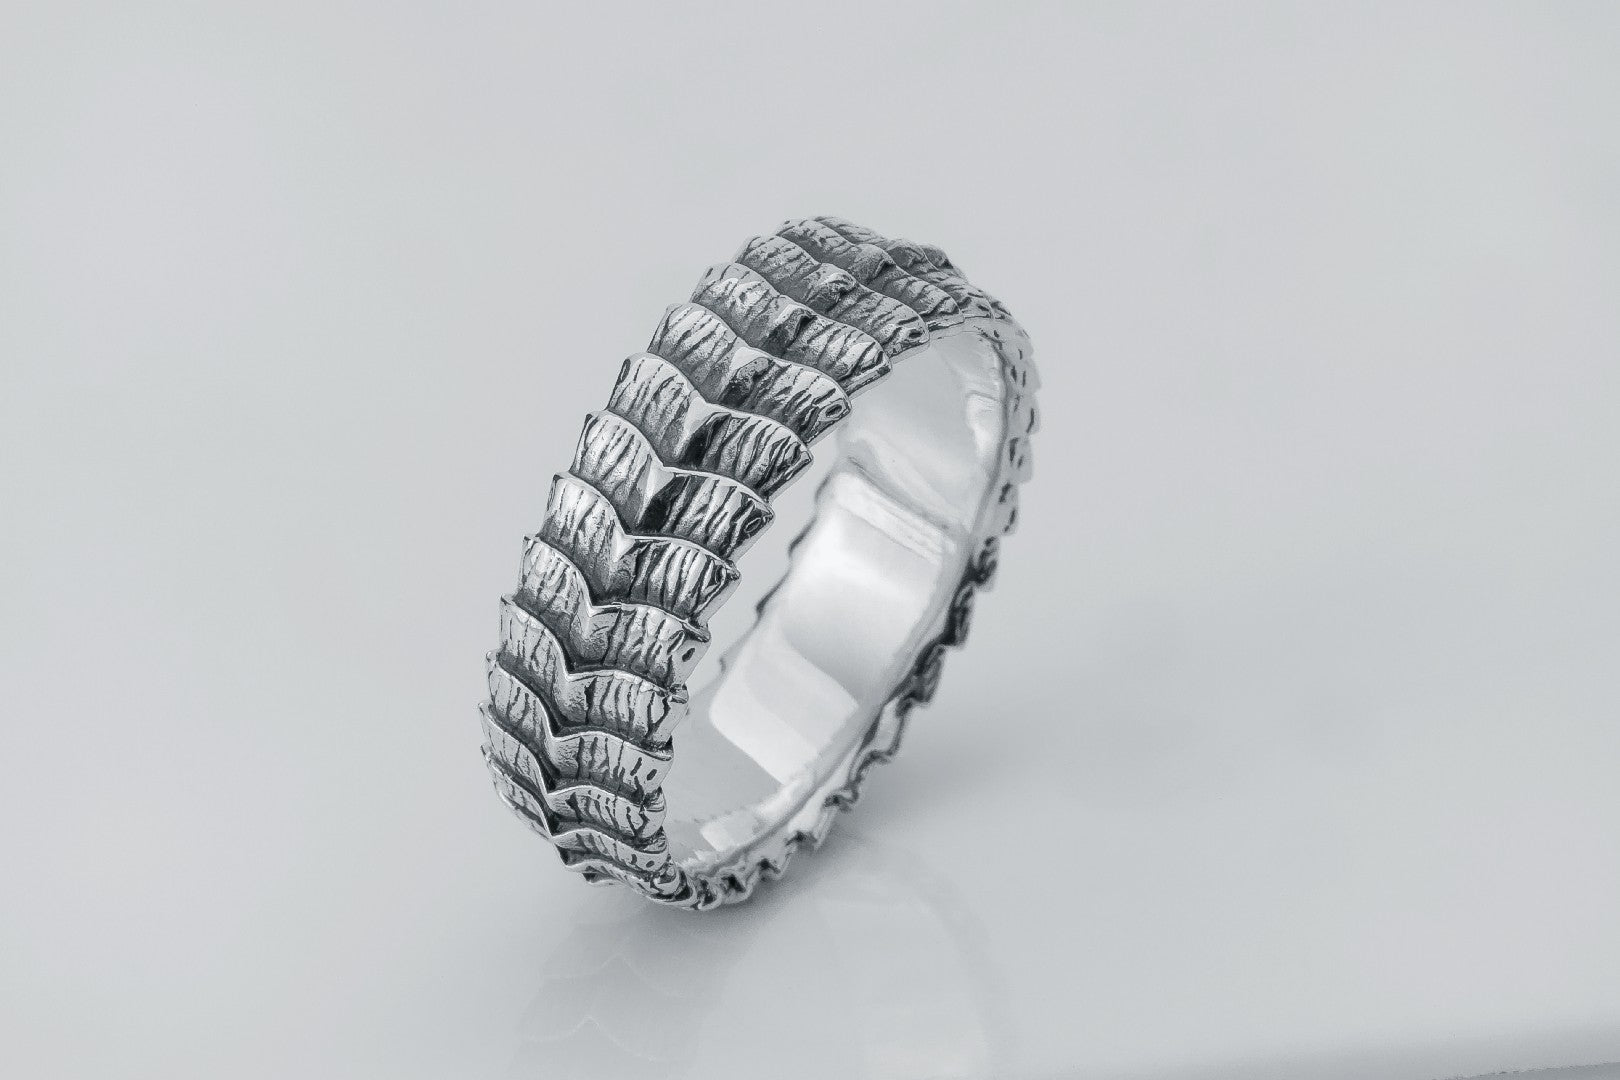 Dragon Scale Ring 925 Silver